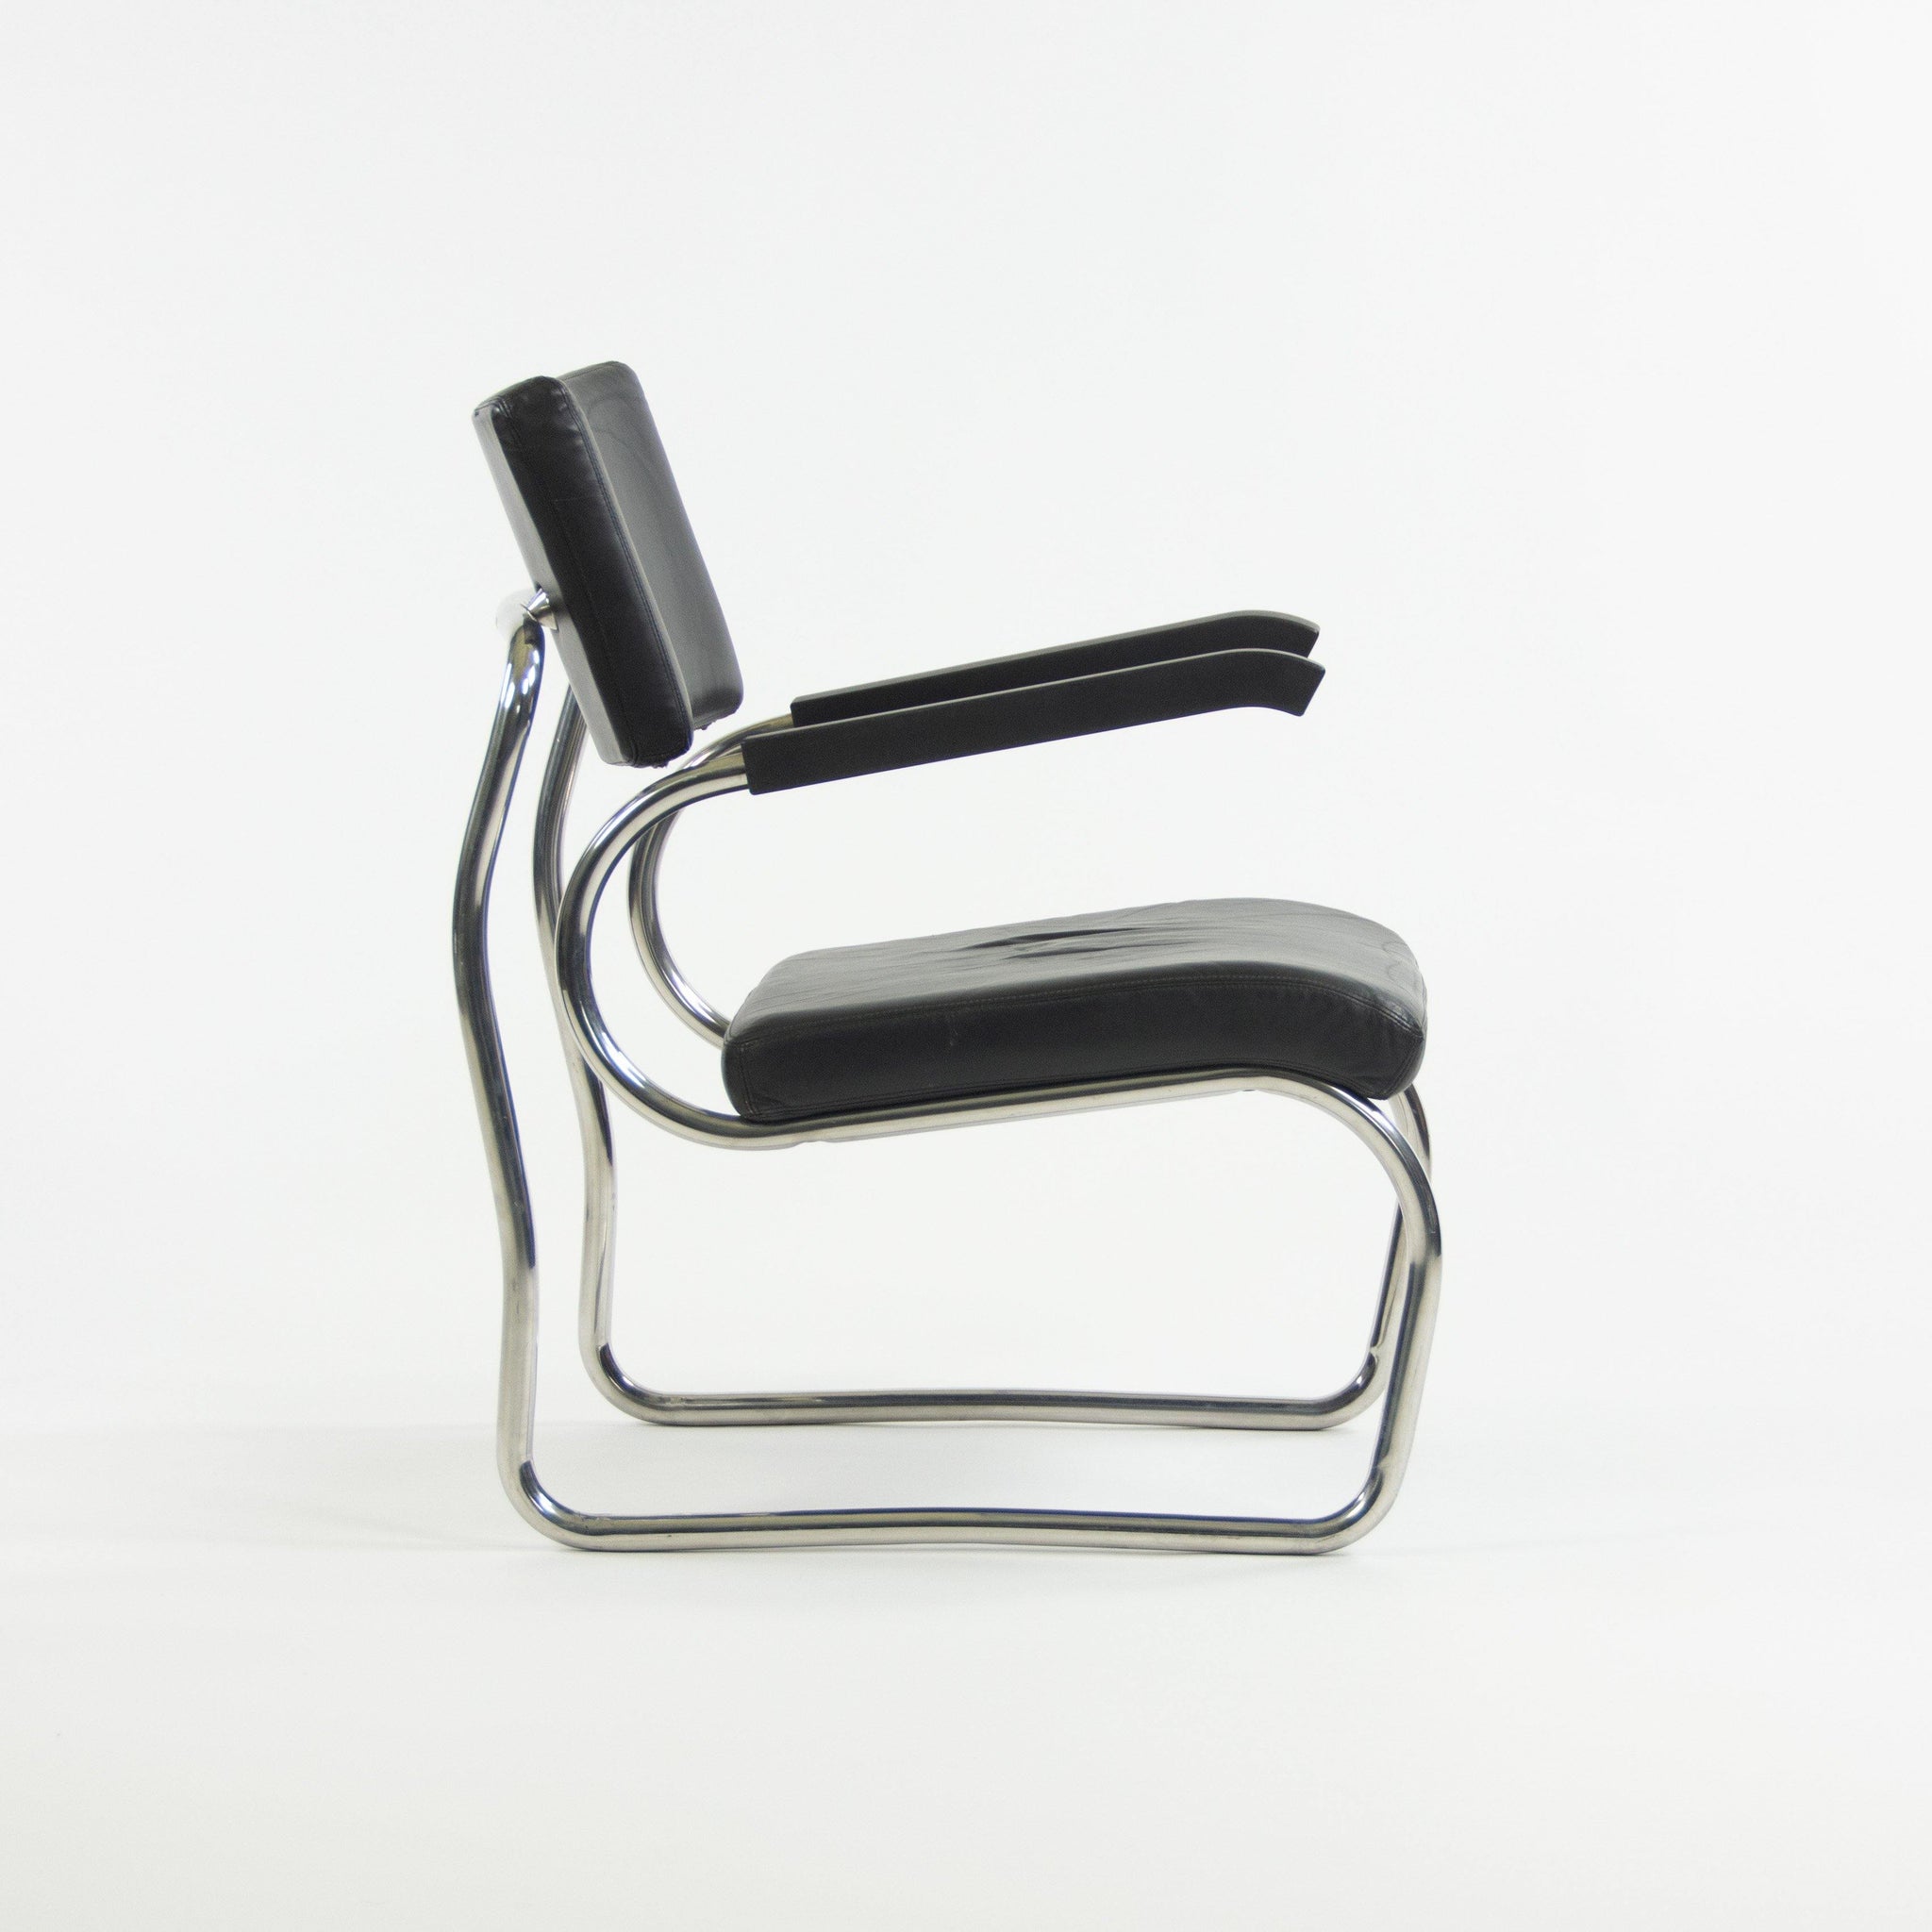 1990s Pair of Sant'elia Arm Chairs by Giuseppe Terragni for Zanotta Leather and Stainless - Rarify Inc.